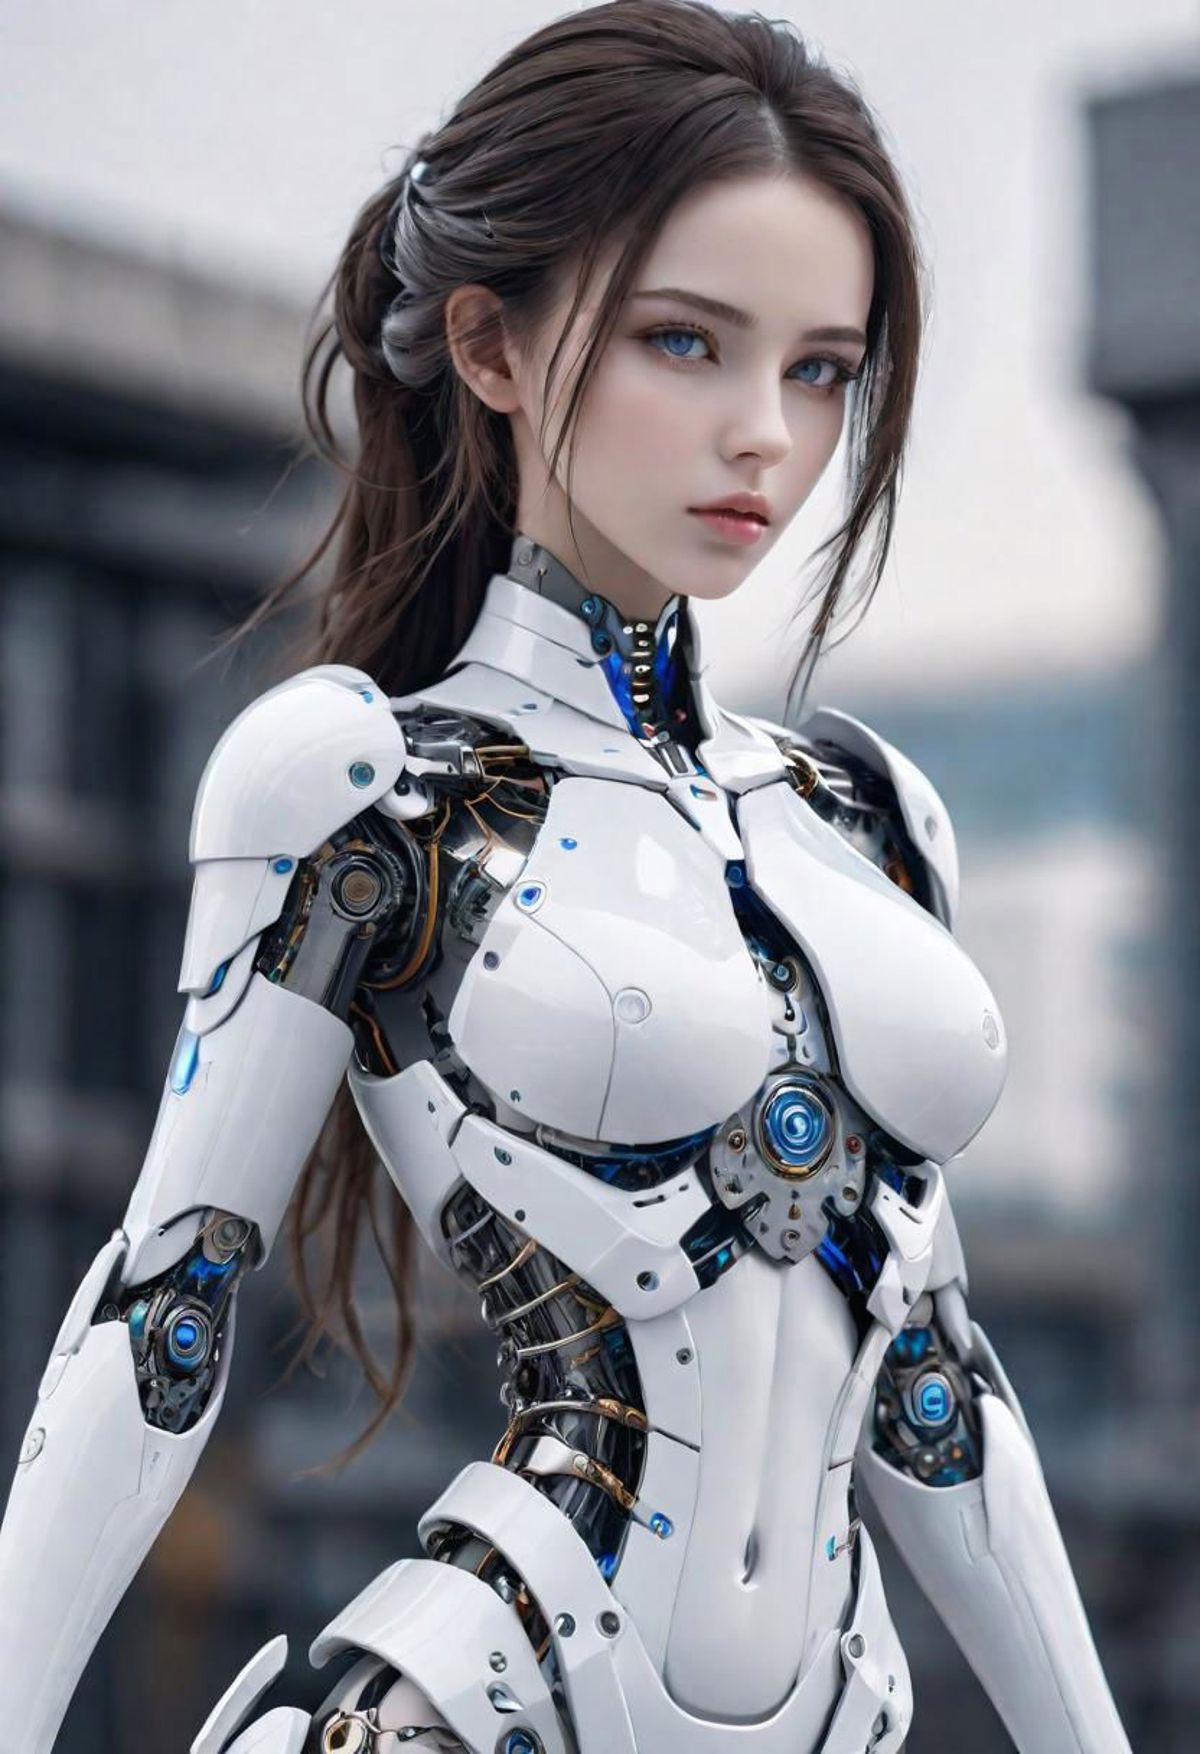 AI model image by forgetit